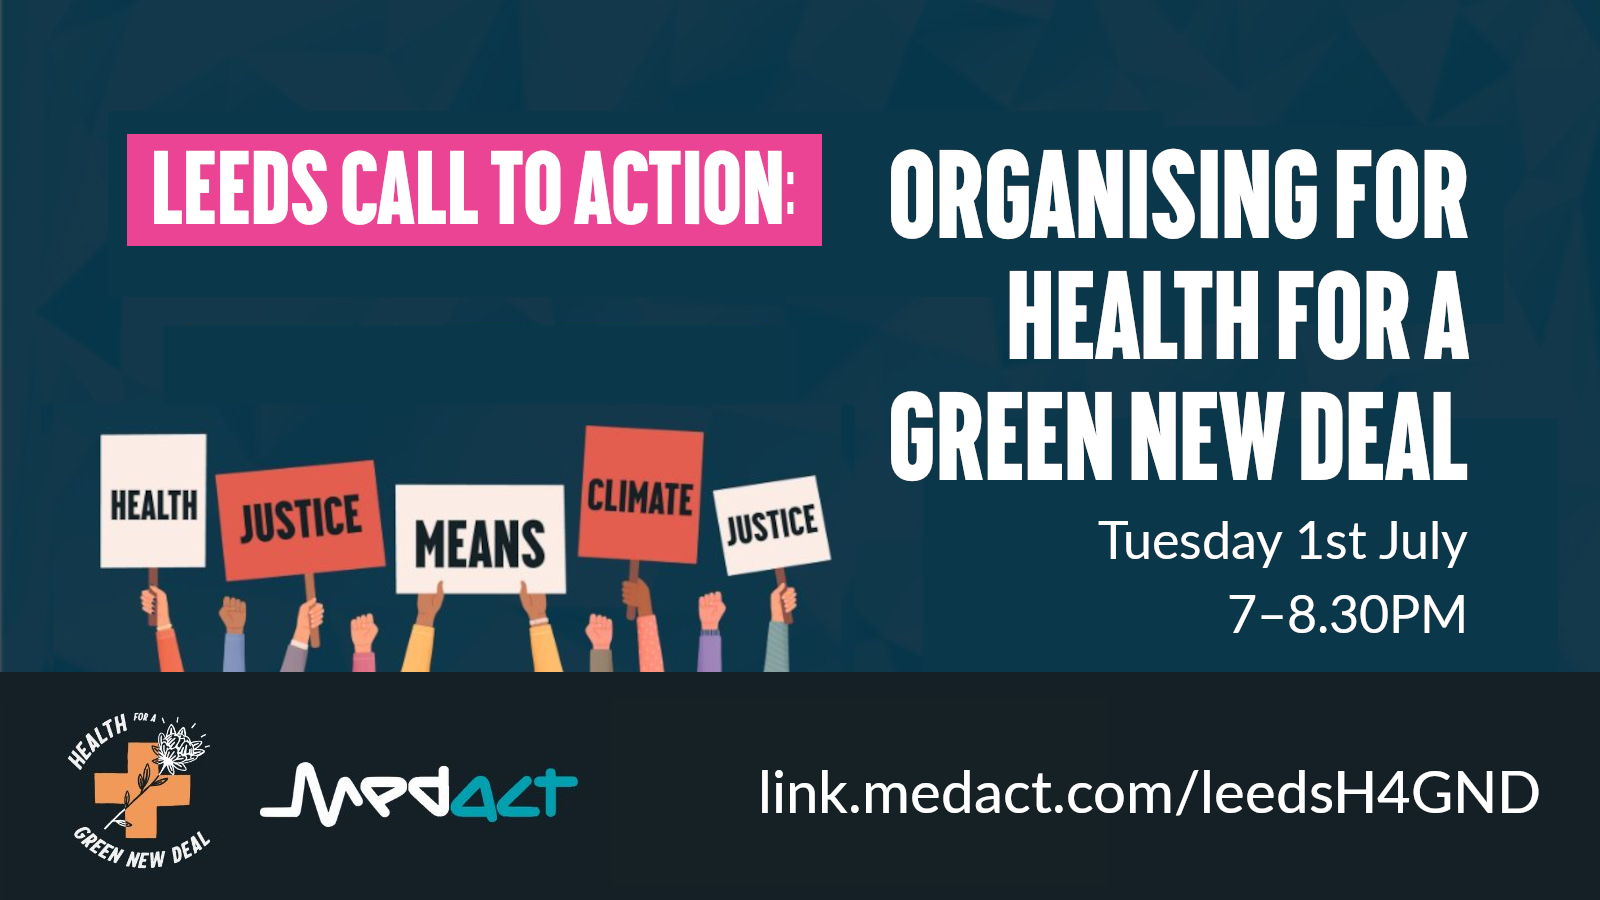 banner image - LEEDS CALL TO ACTION: ORGANISING FOR HEALTH FOR A GREEN NEW DEAL (Tuesday 1st July, 7-8.30PM) - with hands holding signs reading "Health Justice Means Climate Justice" and logos for Medact and Health for a Green New Deal